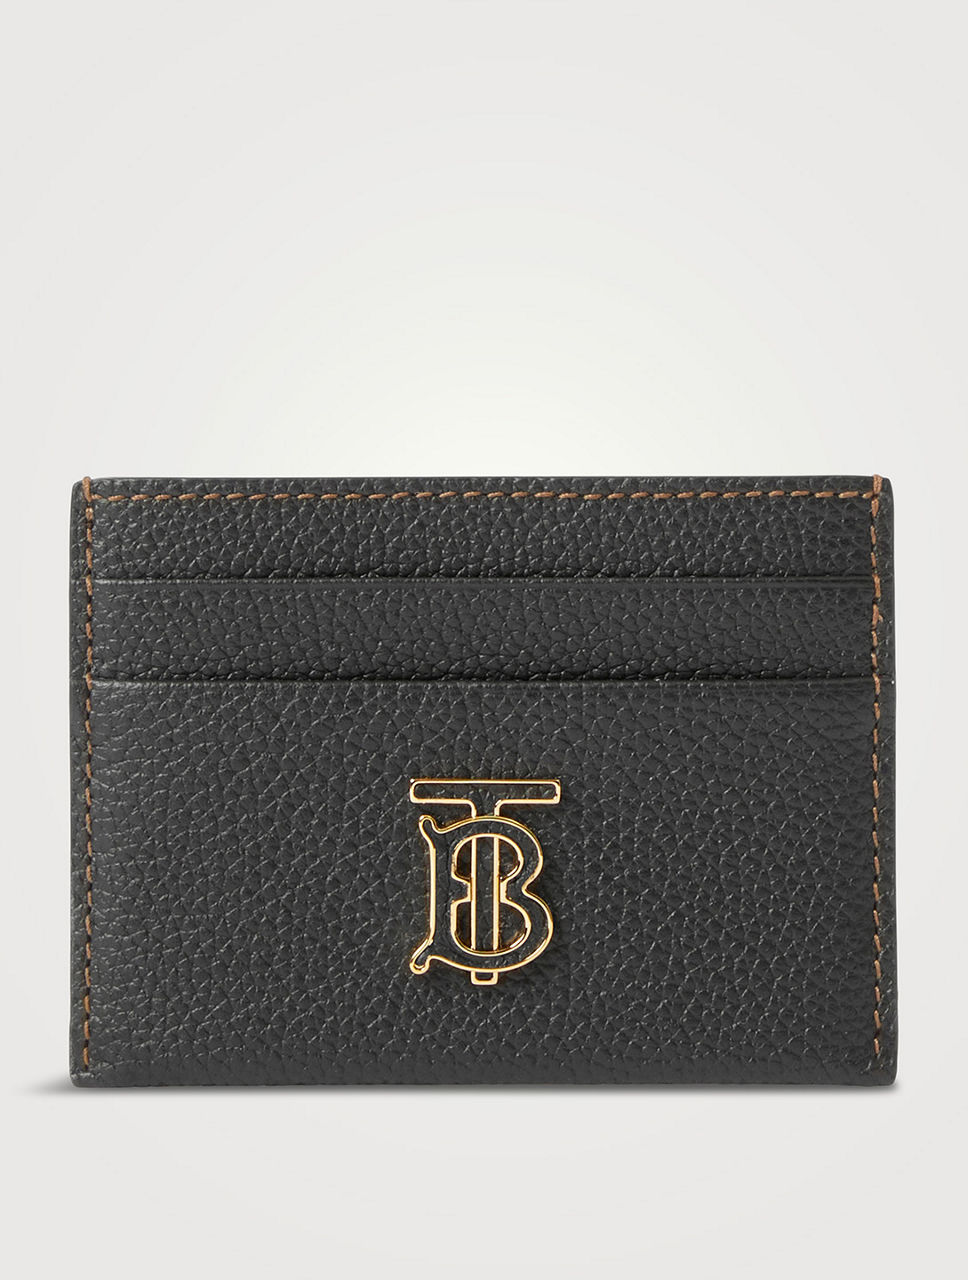 Grainy Leather Tb Card Case